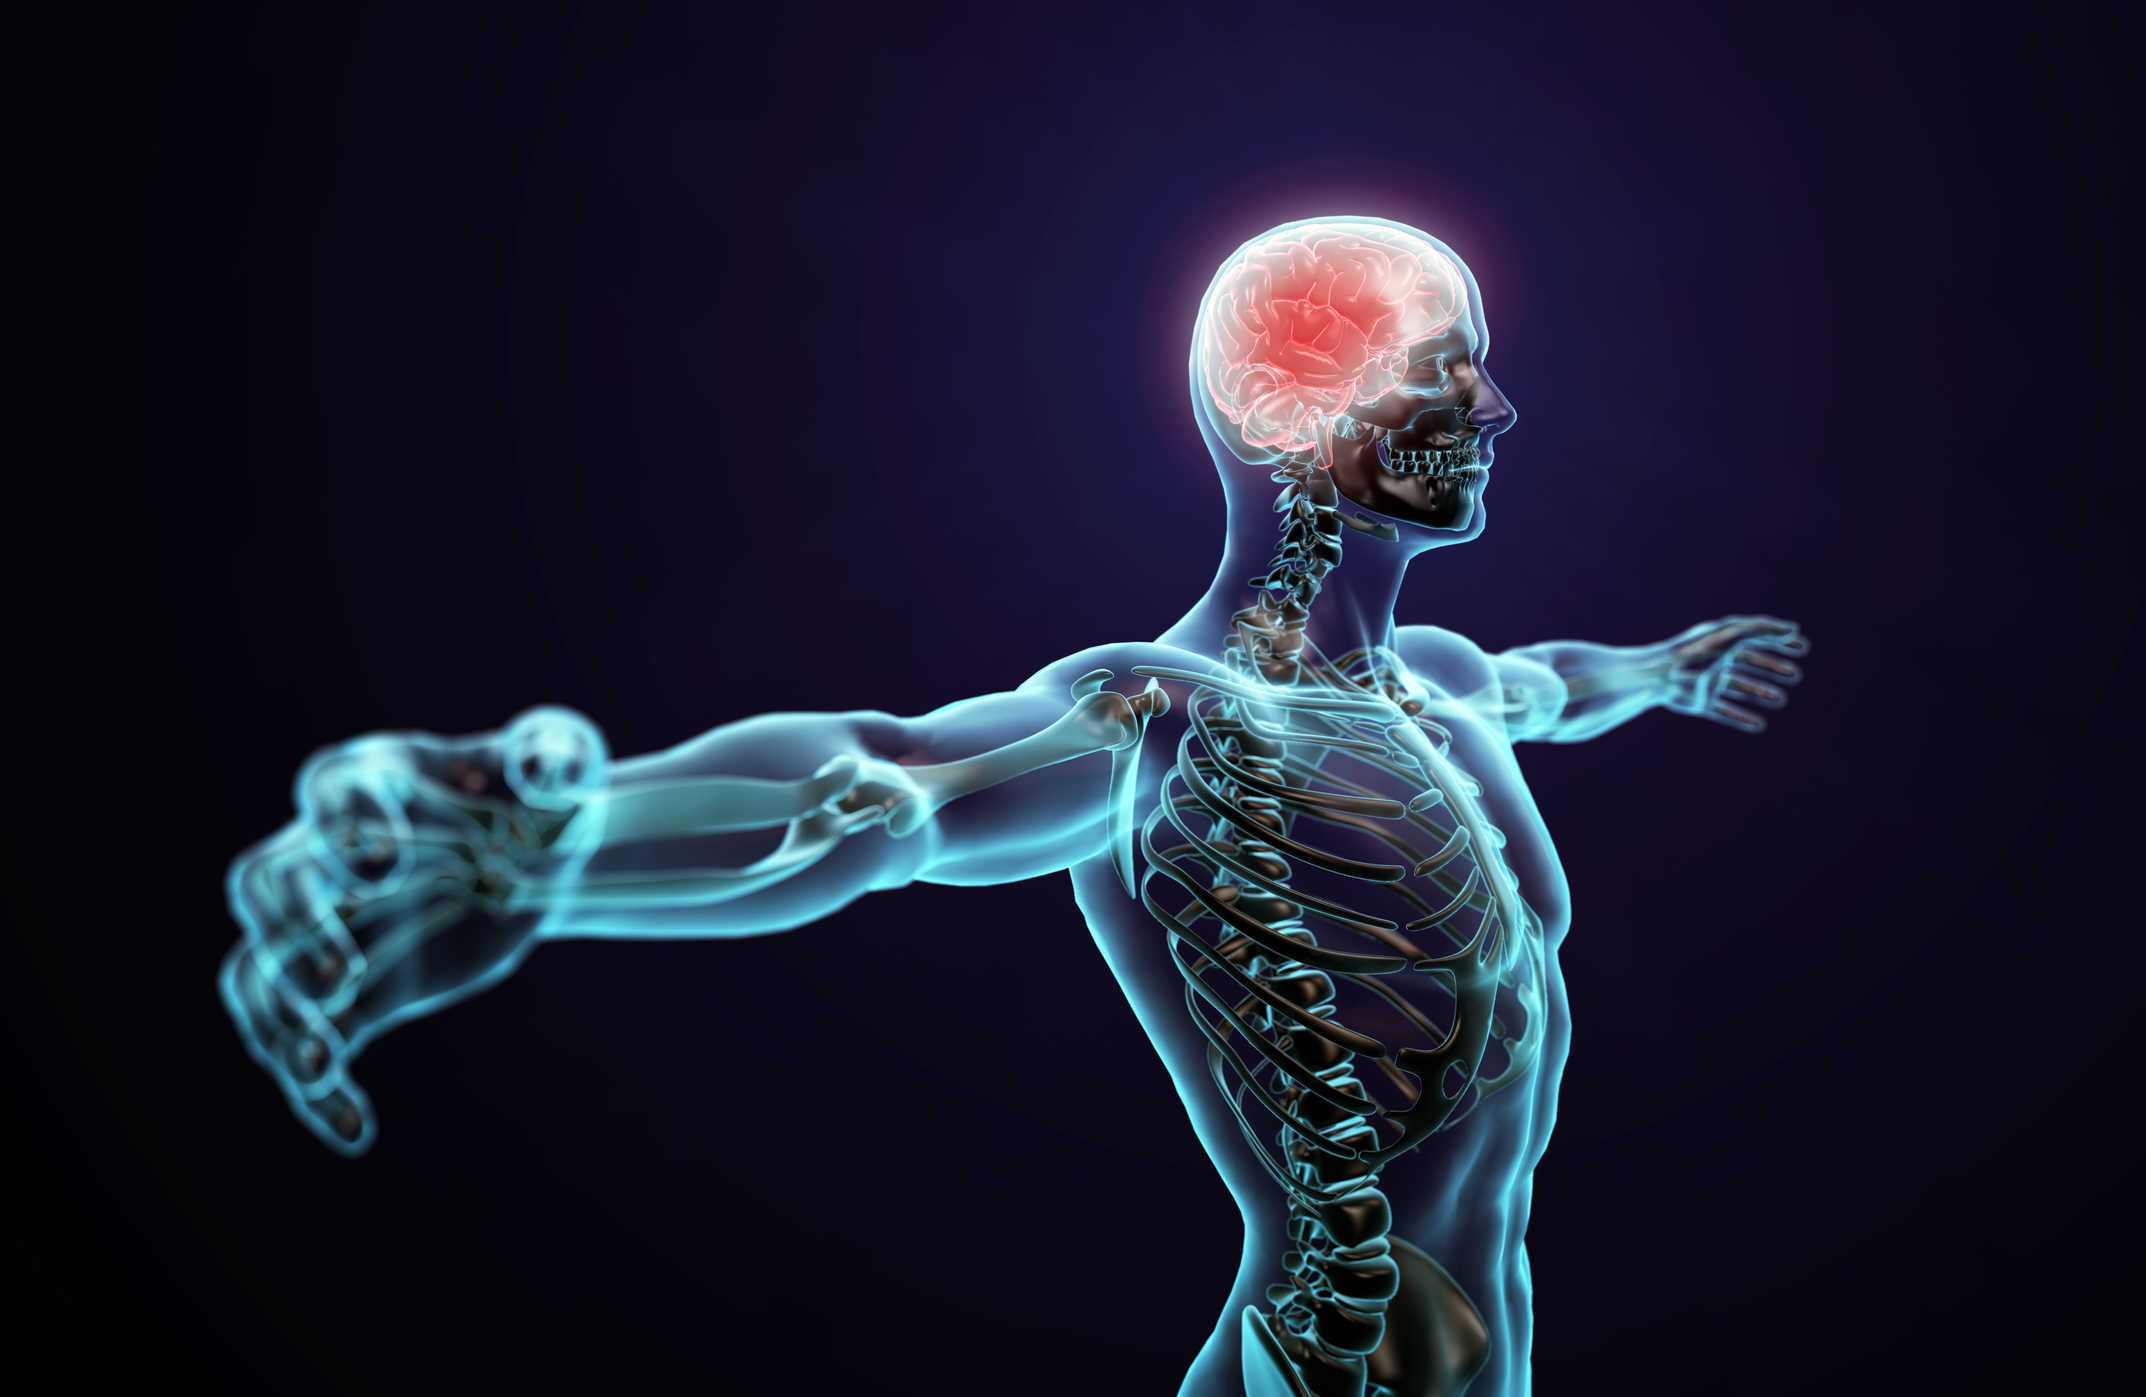 Neurological Recovery Following a Spinal Cord Injury: Important Facts and Information